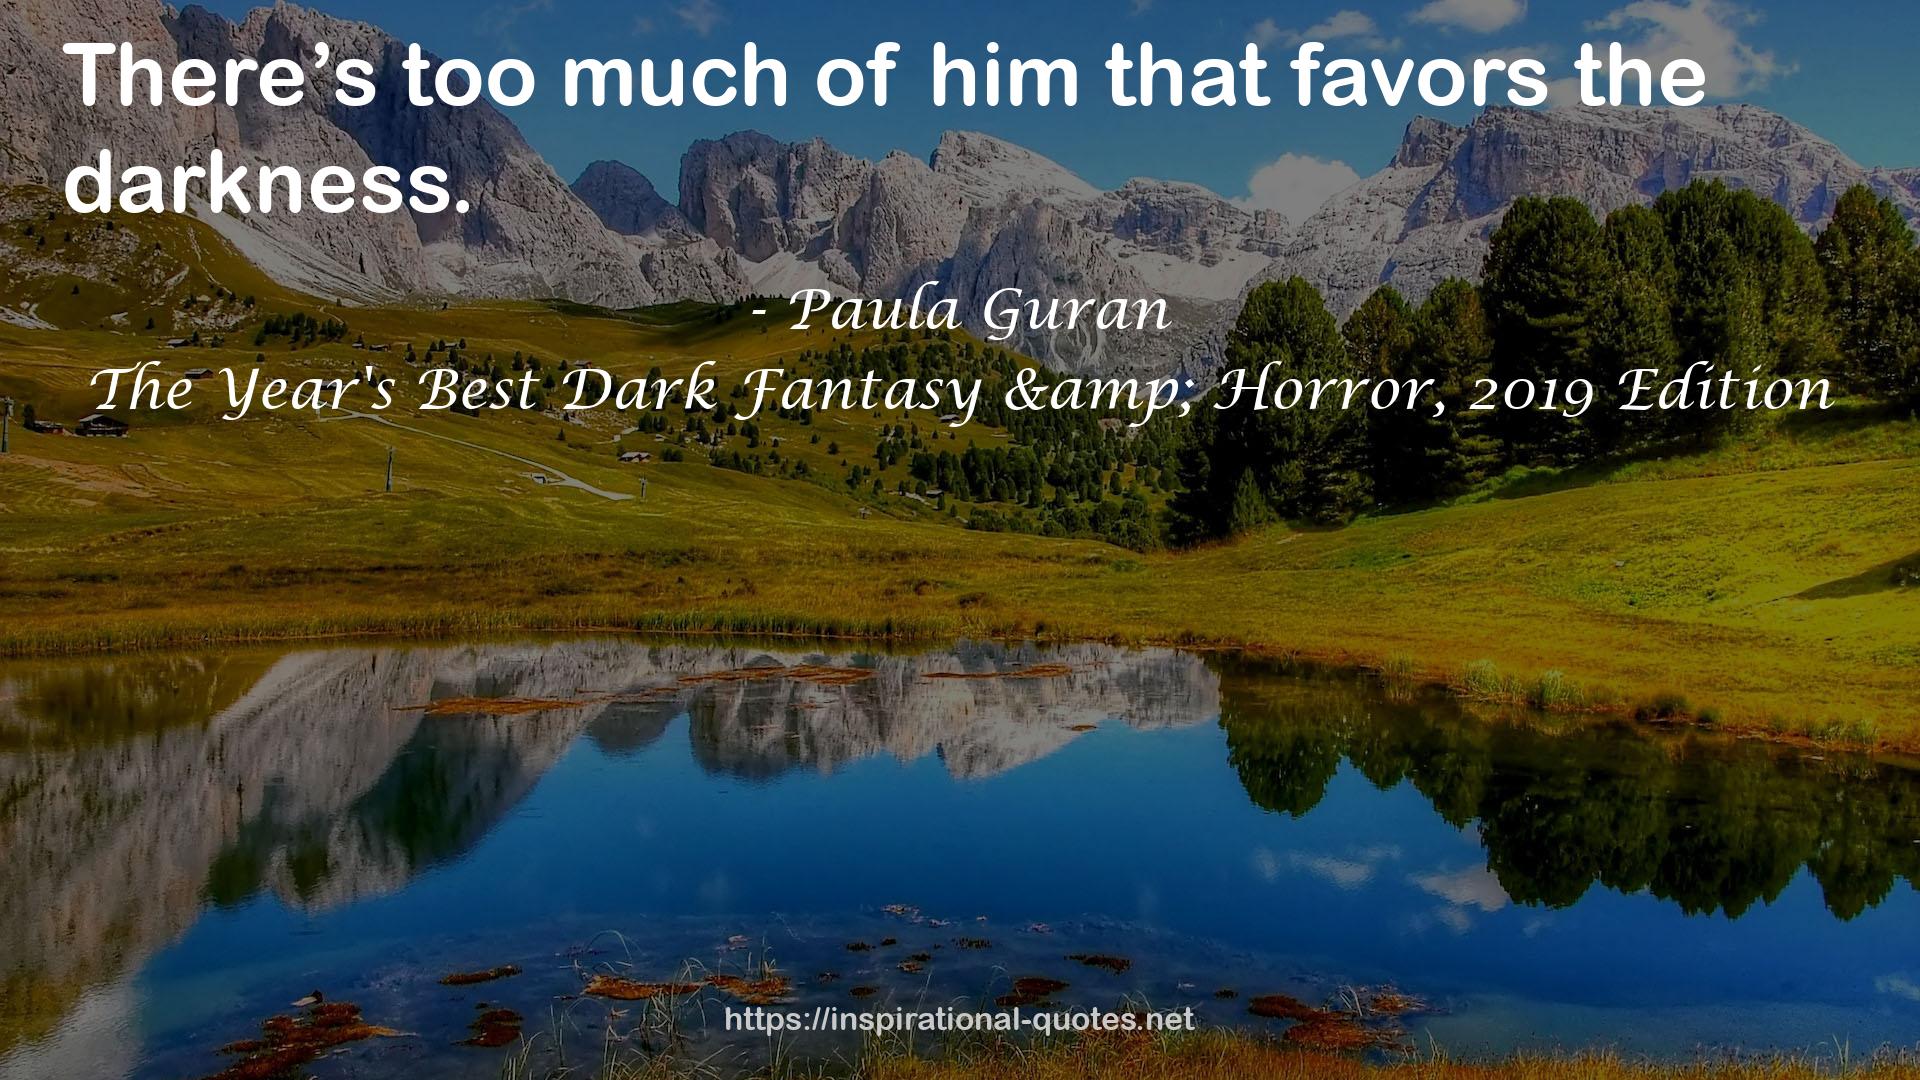 The Year's Best Dark Fantasy & Horror, 2019 Edition QUOTES